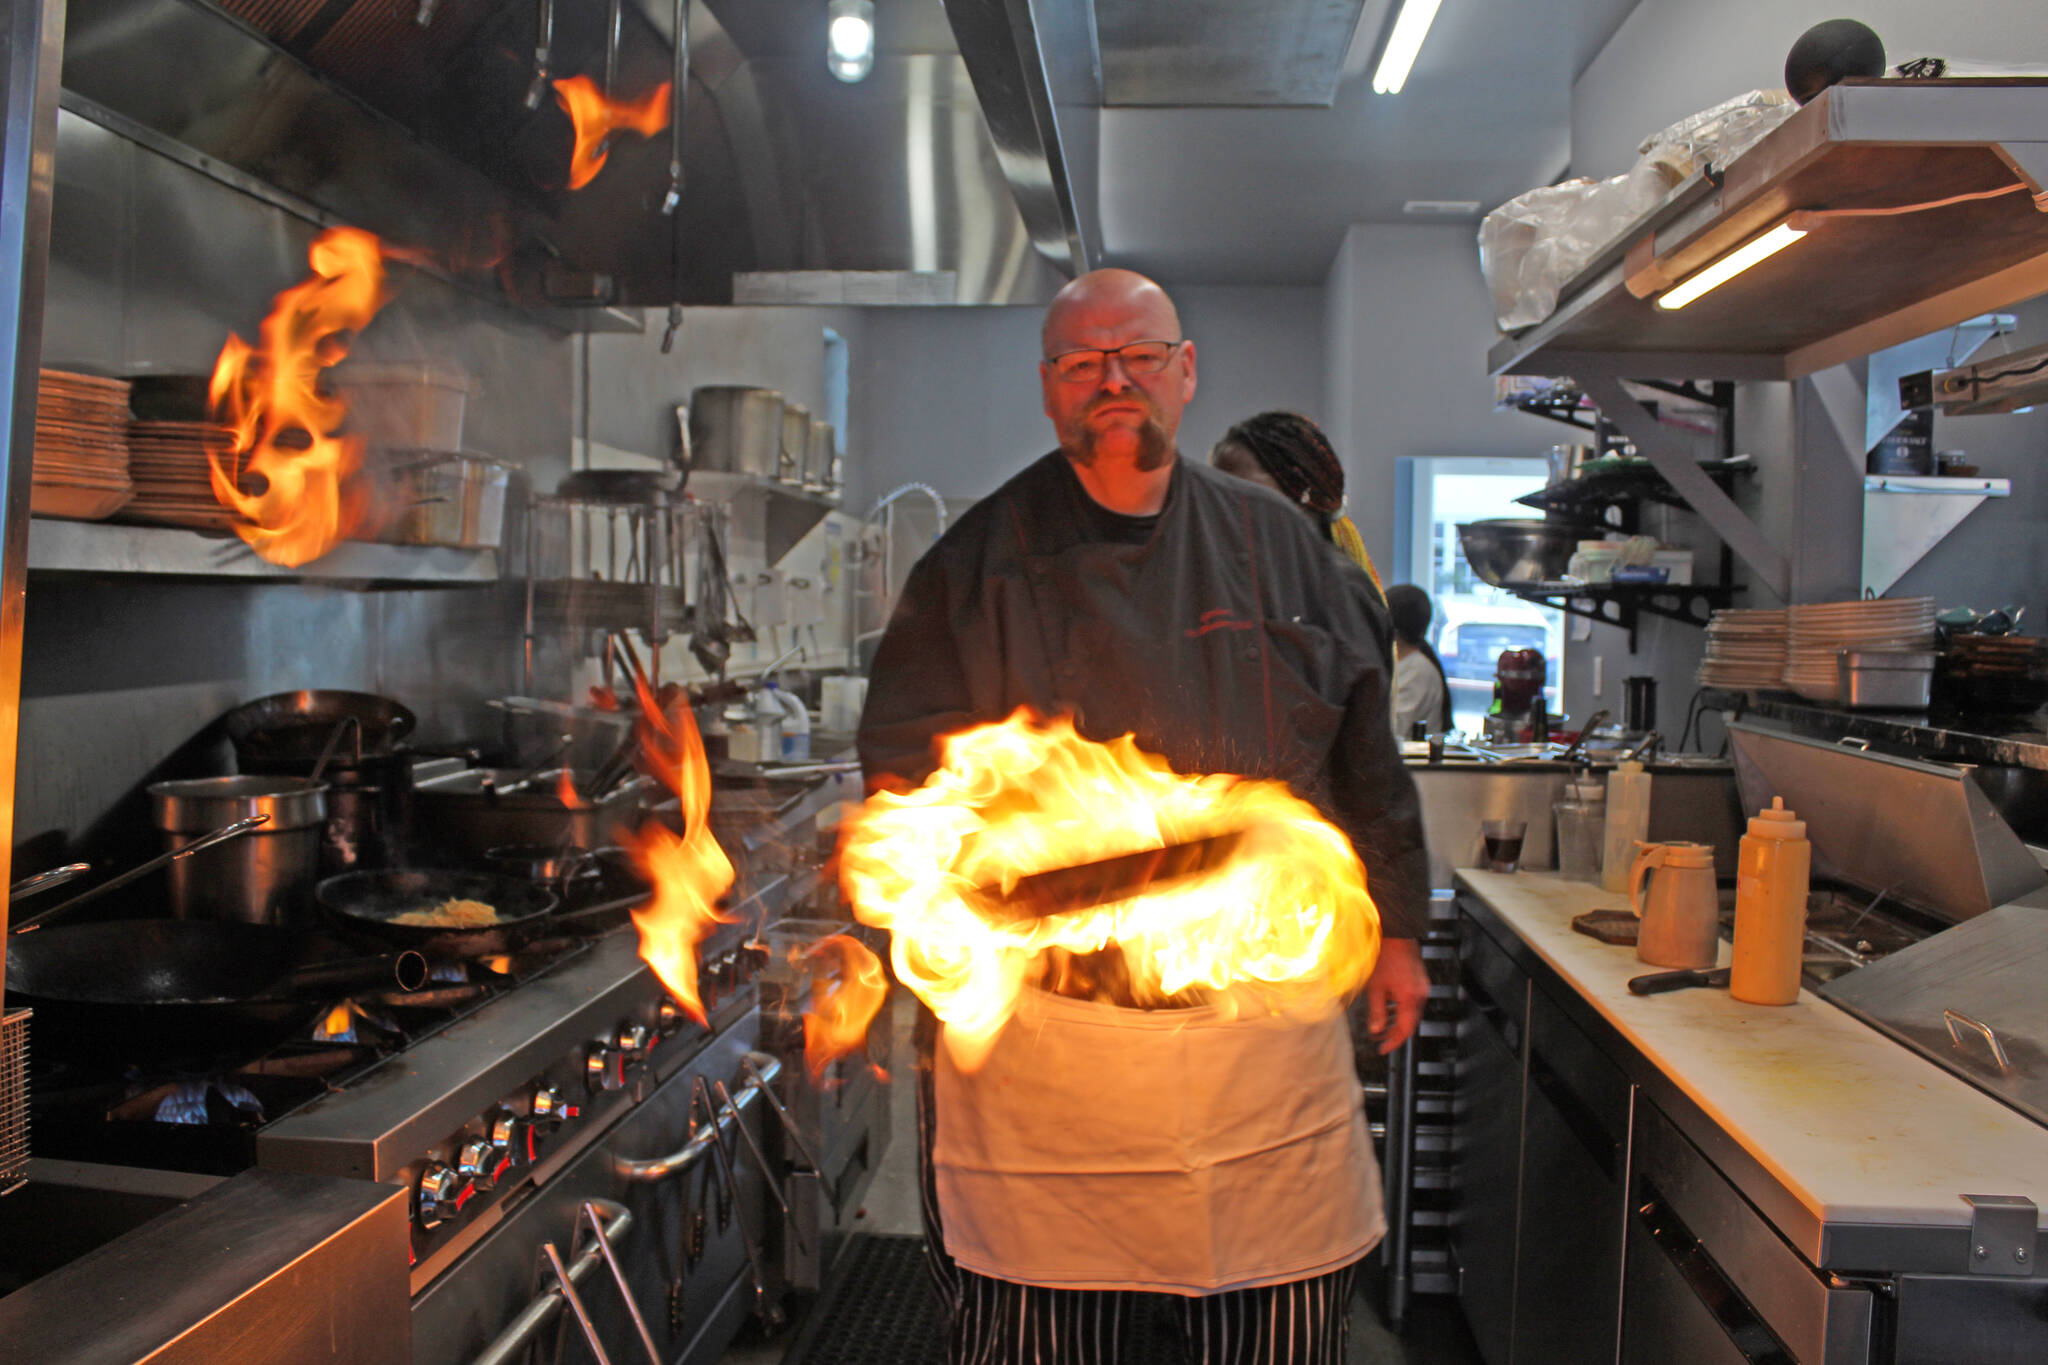 Chef Gordon Stewart adds a fiery flare to a dish in the kitchen at Gordon’s Fusion. (Photo by Karina Andrew/Whidbey News-Times)